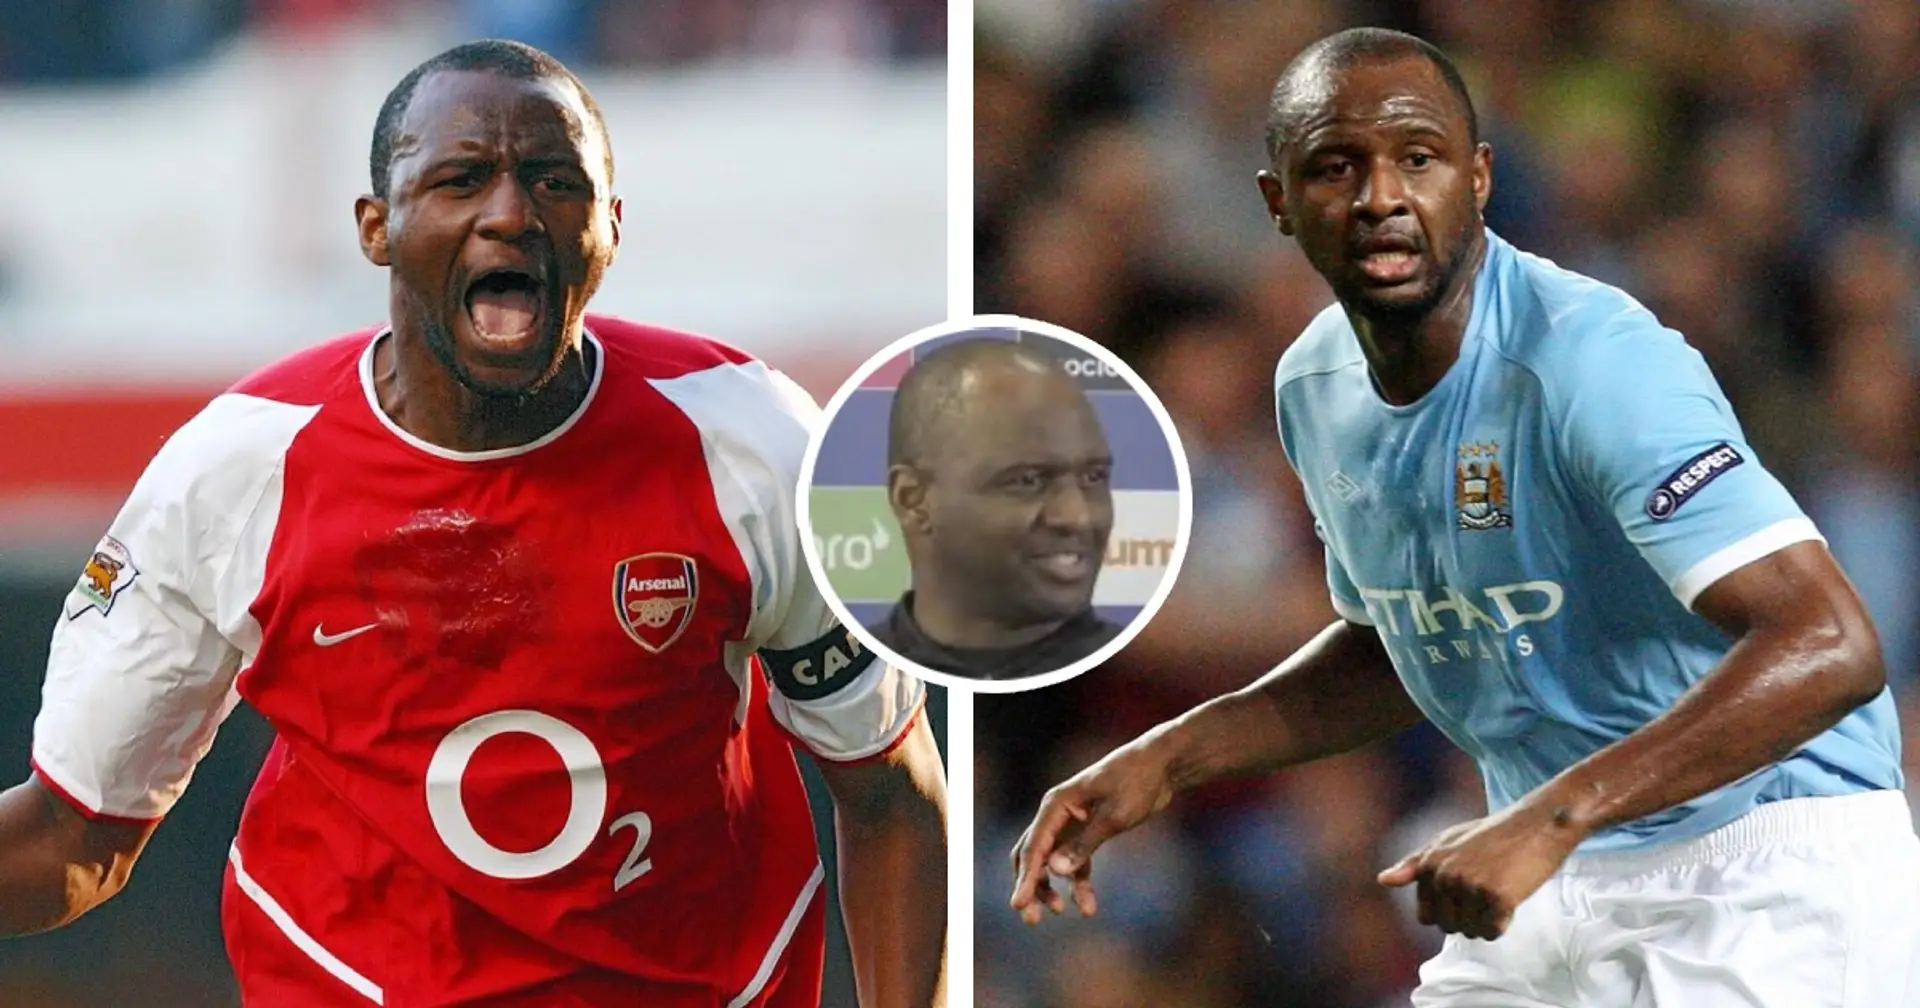 Patrick Vieira: Man City will chase Arsenal to the very last day of the season